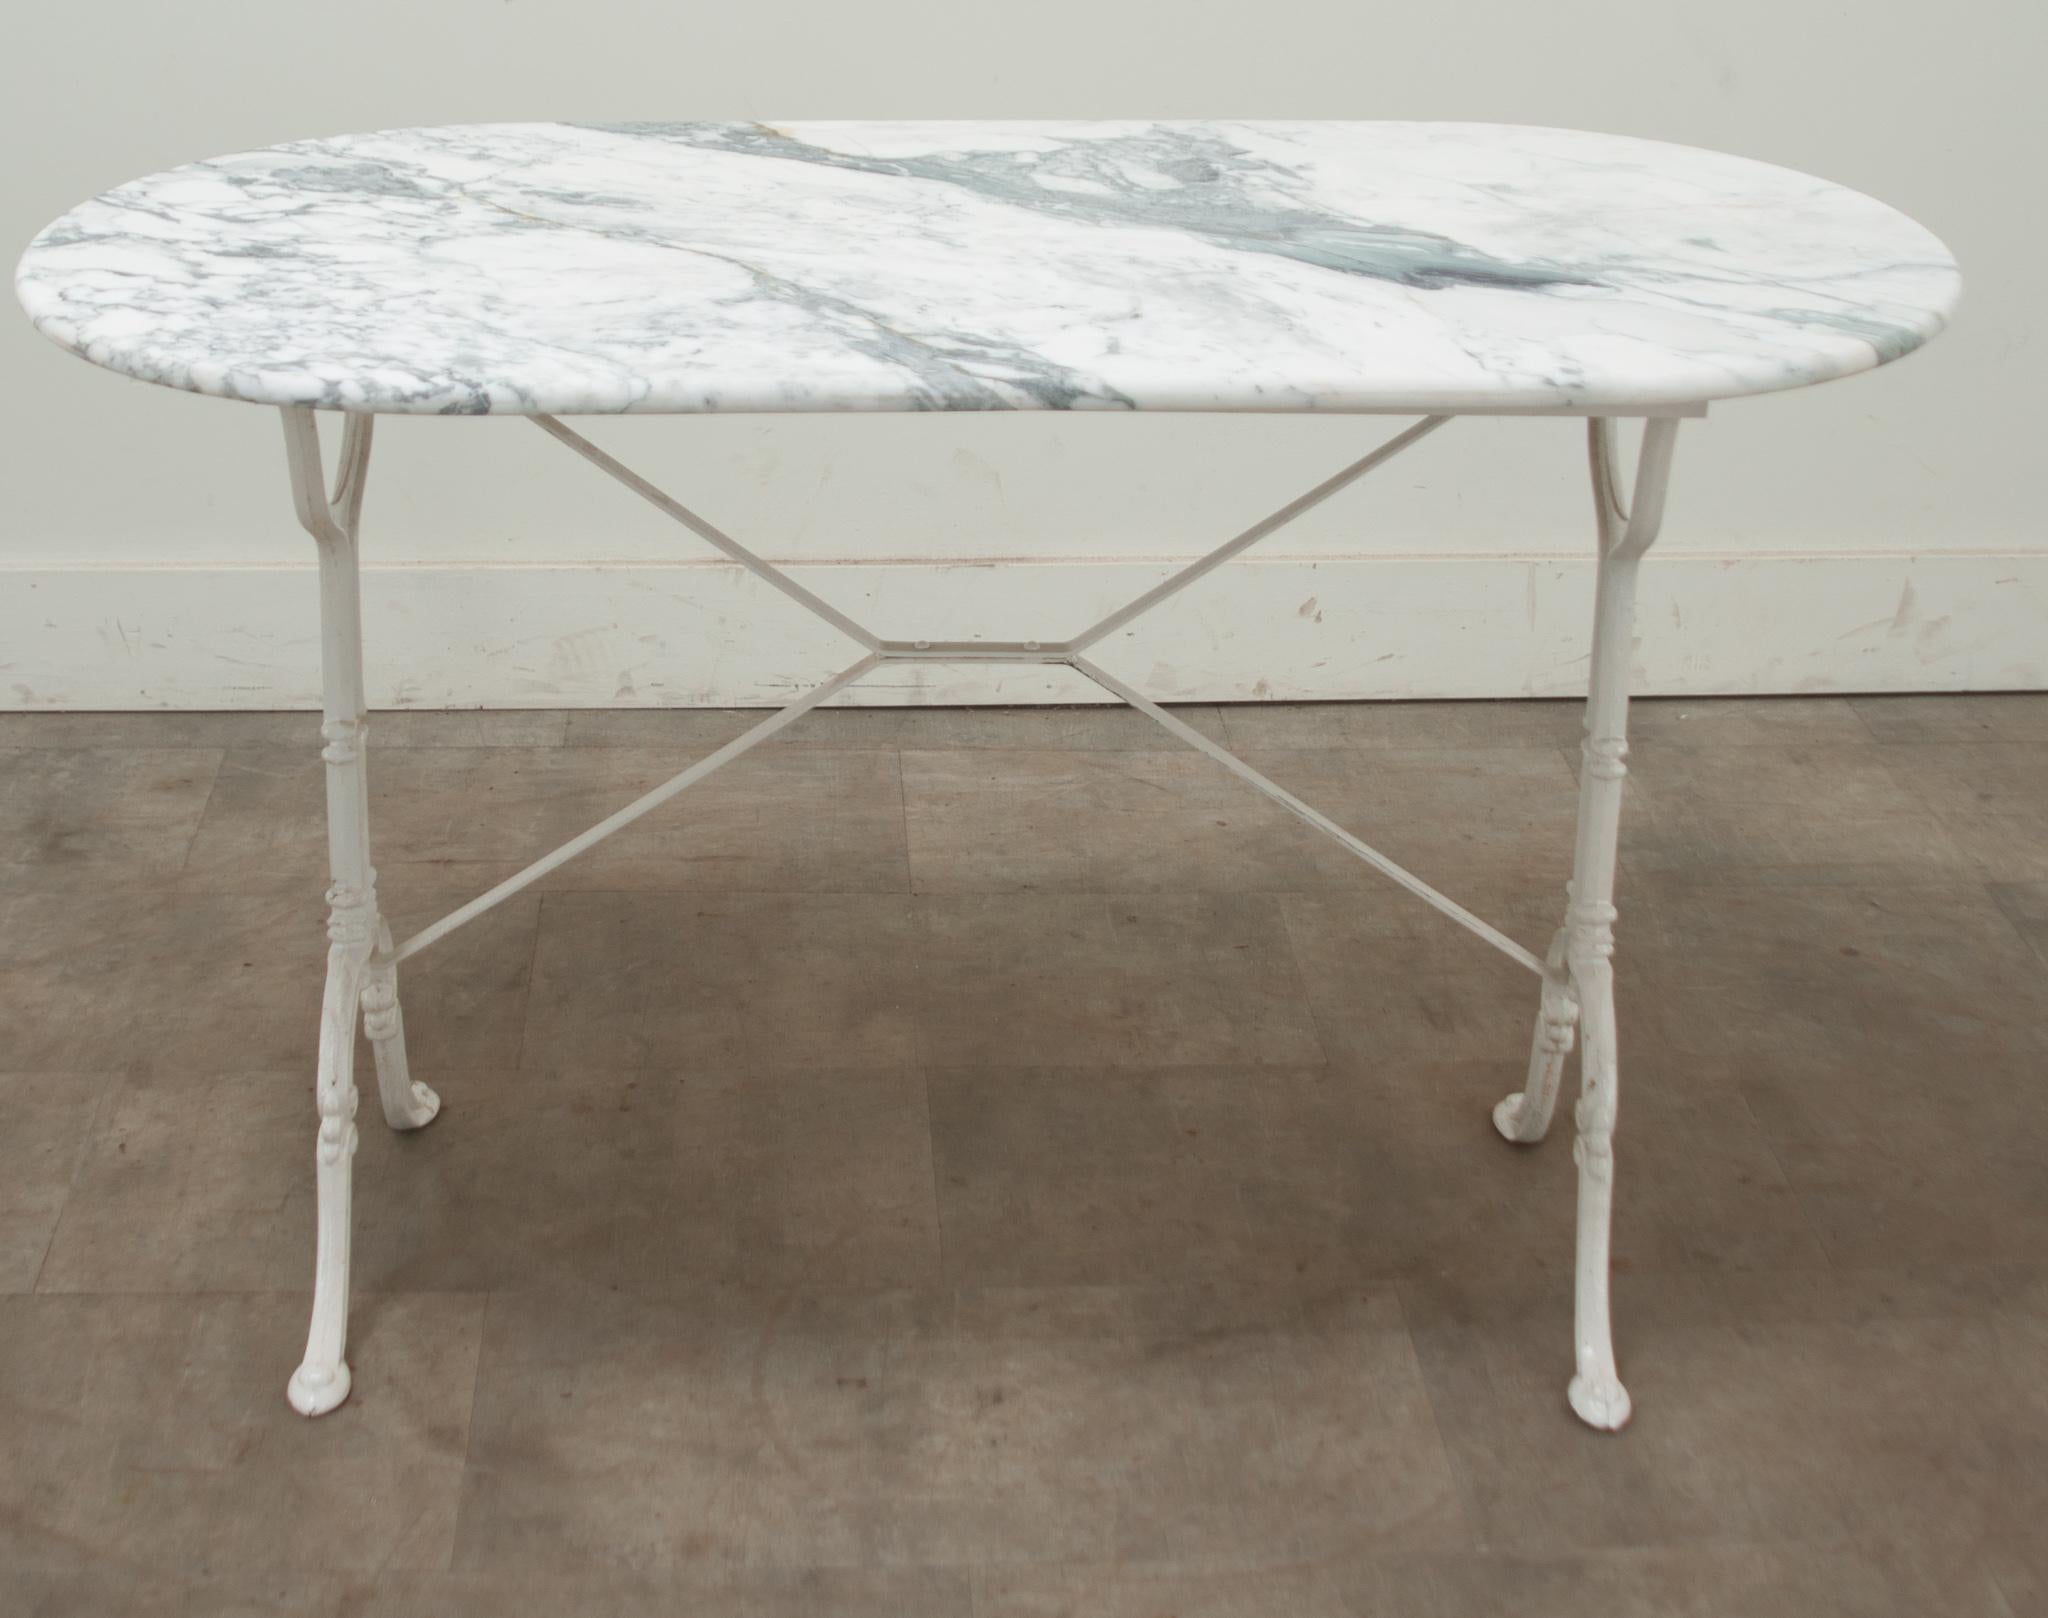 A classically styled French bistro table featuring a white capsule-shaped marble top over a painted cast iron base. This petite dining table shows wear consistent with age and use. Be sure to view the detailed images to see the current condition.